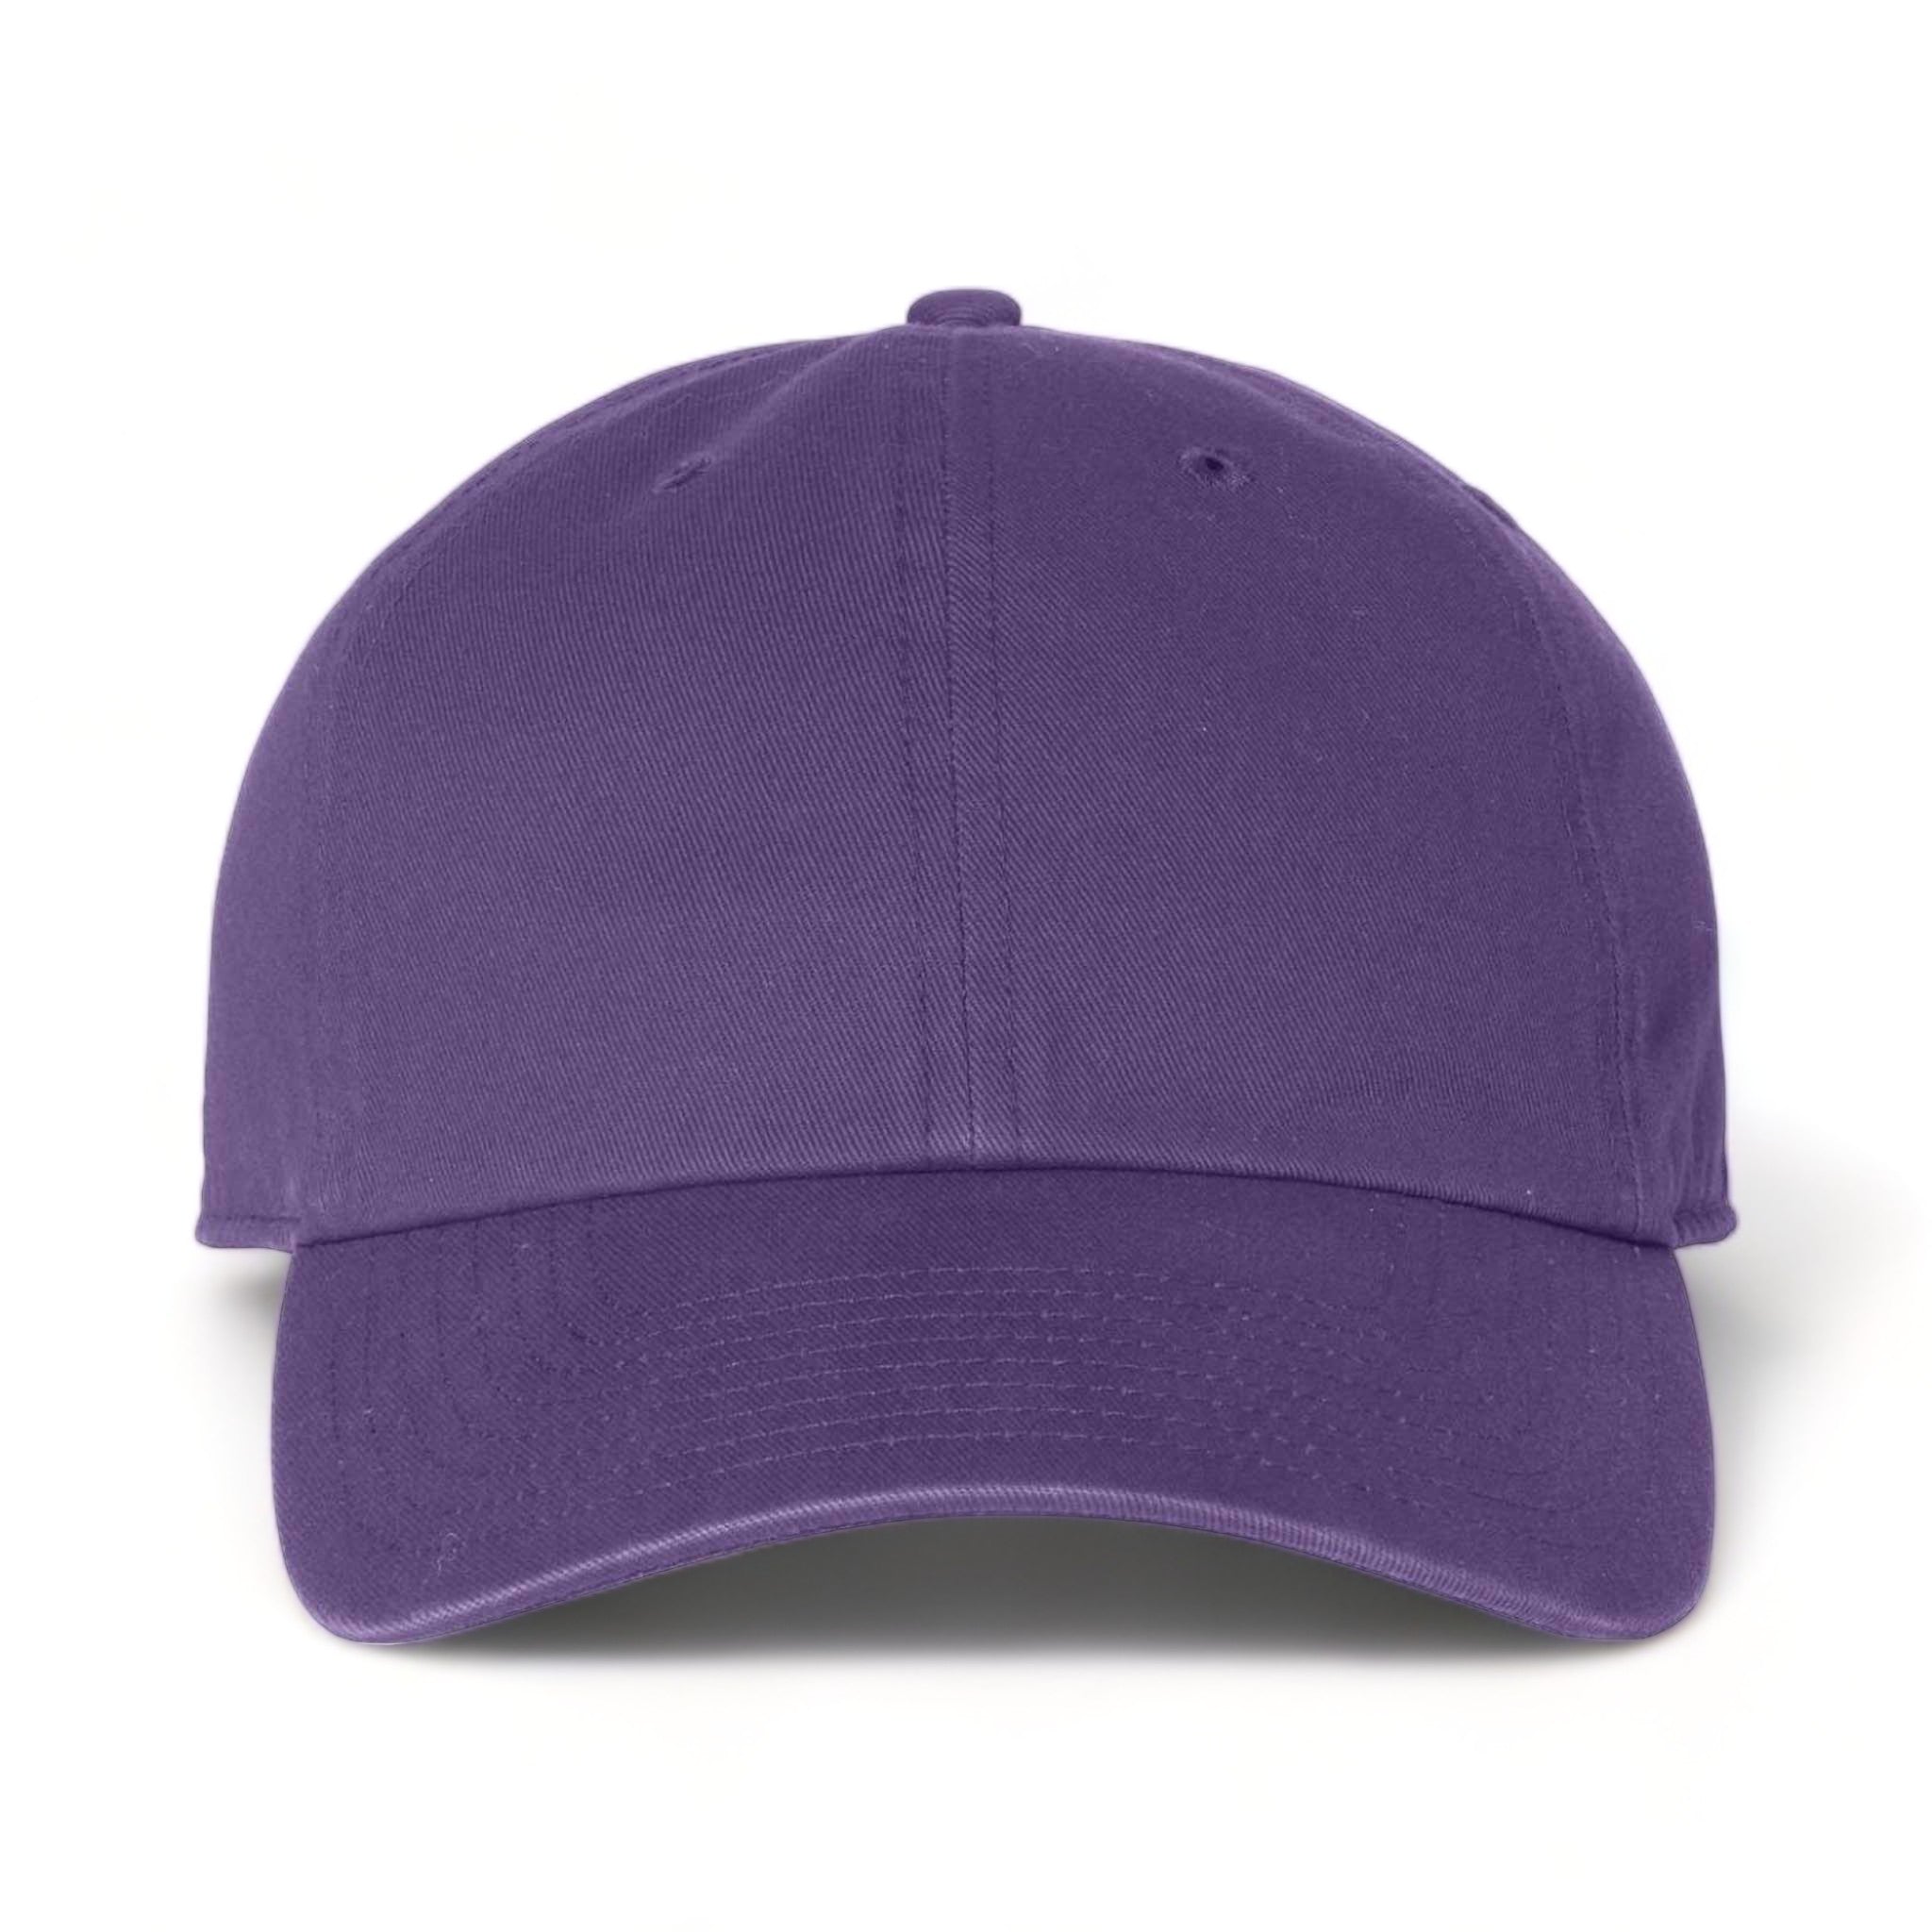 Front view of 47 Brand 4700 custom hat in purple